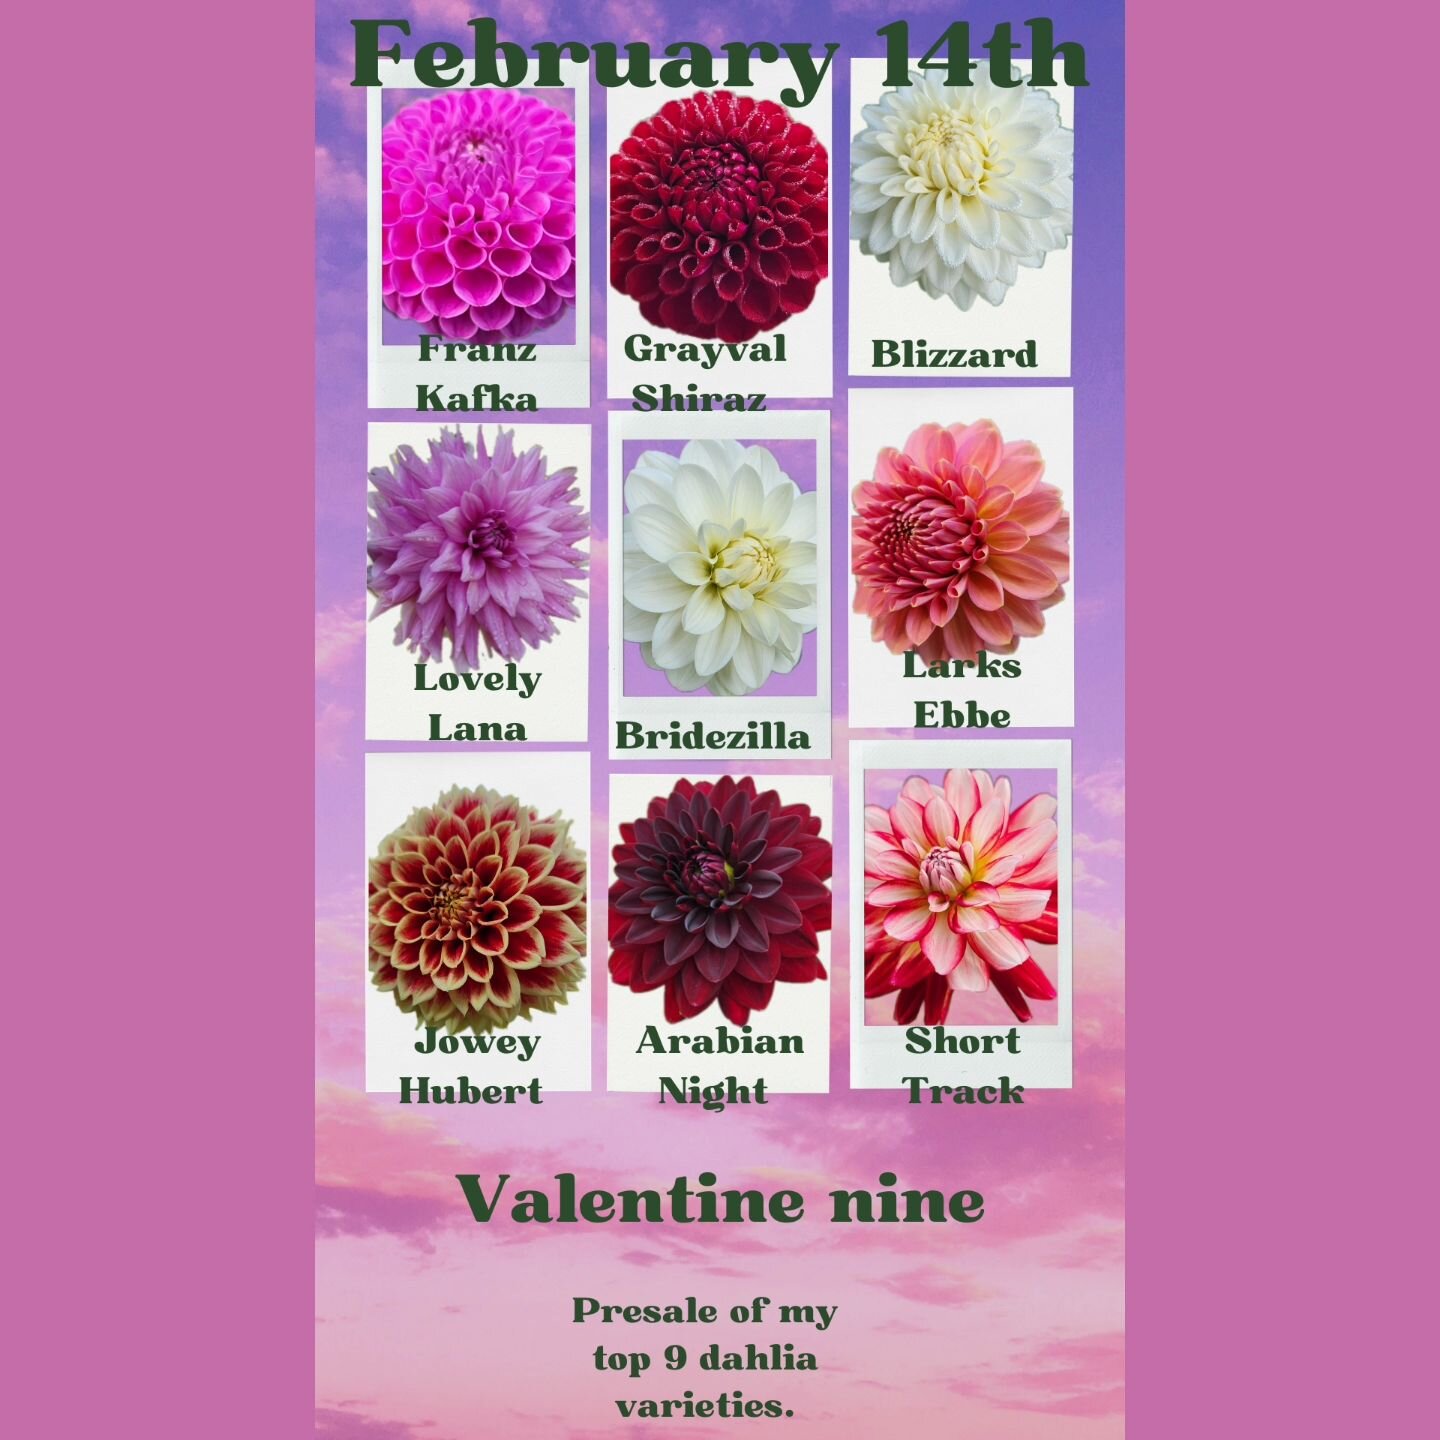 Dahlia mania is in full swing, but there will be plenty of sales between now and spring, mine incuded. This is merely a presale so that I can gauge interest. All (well 9) of my BEST, top-performing varieties that made a ton of tubers (yay!).

#dahlia